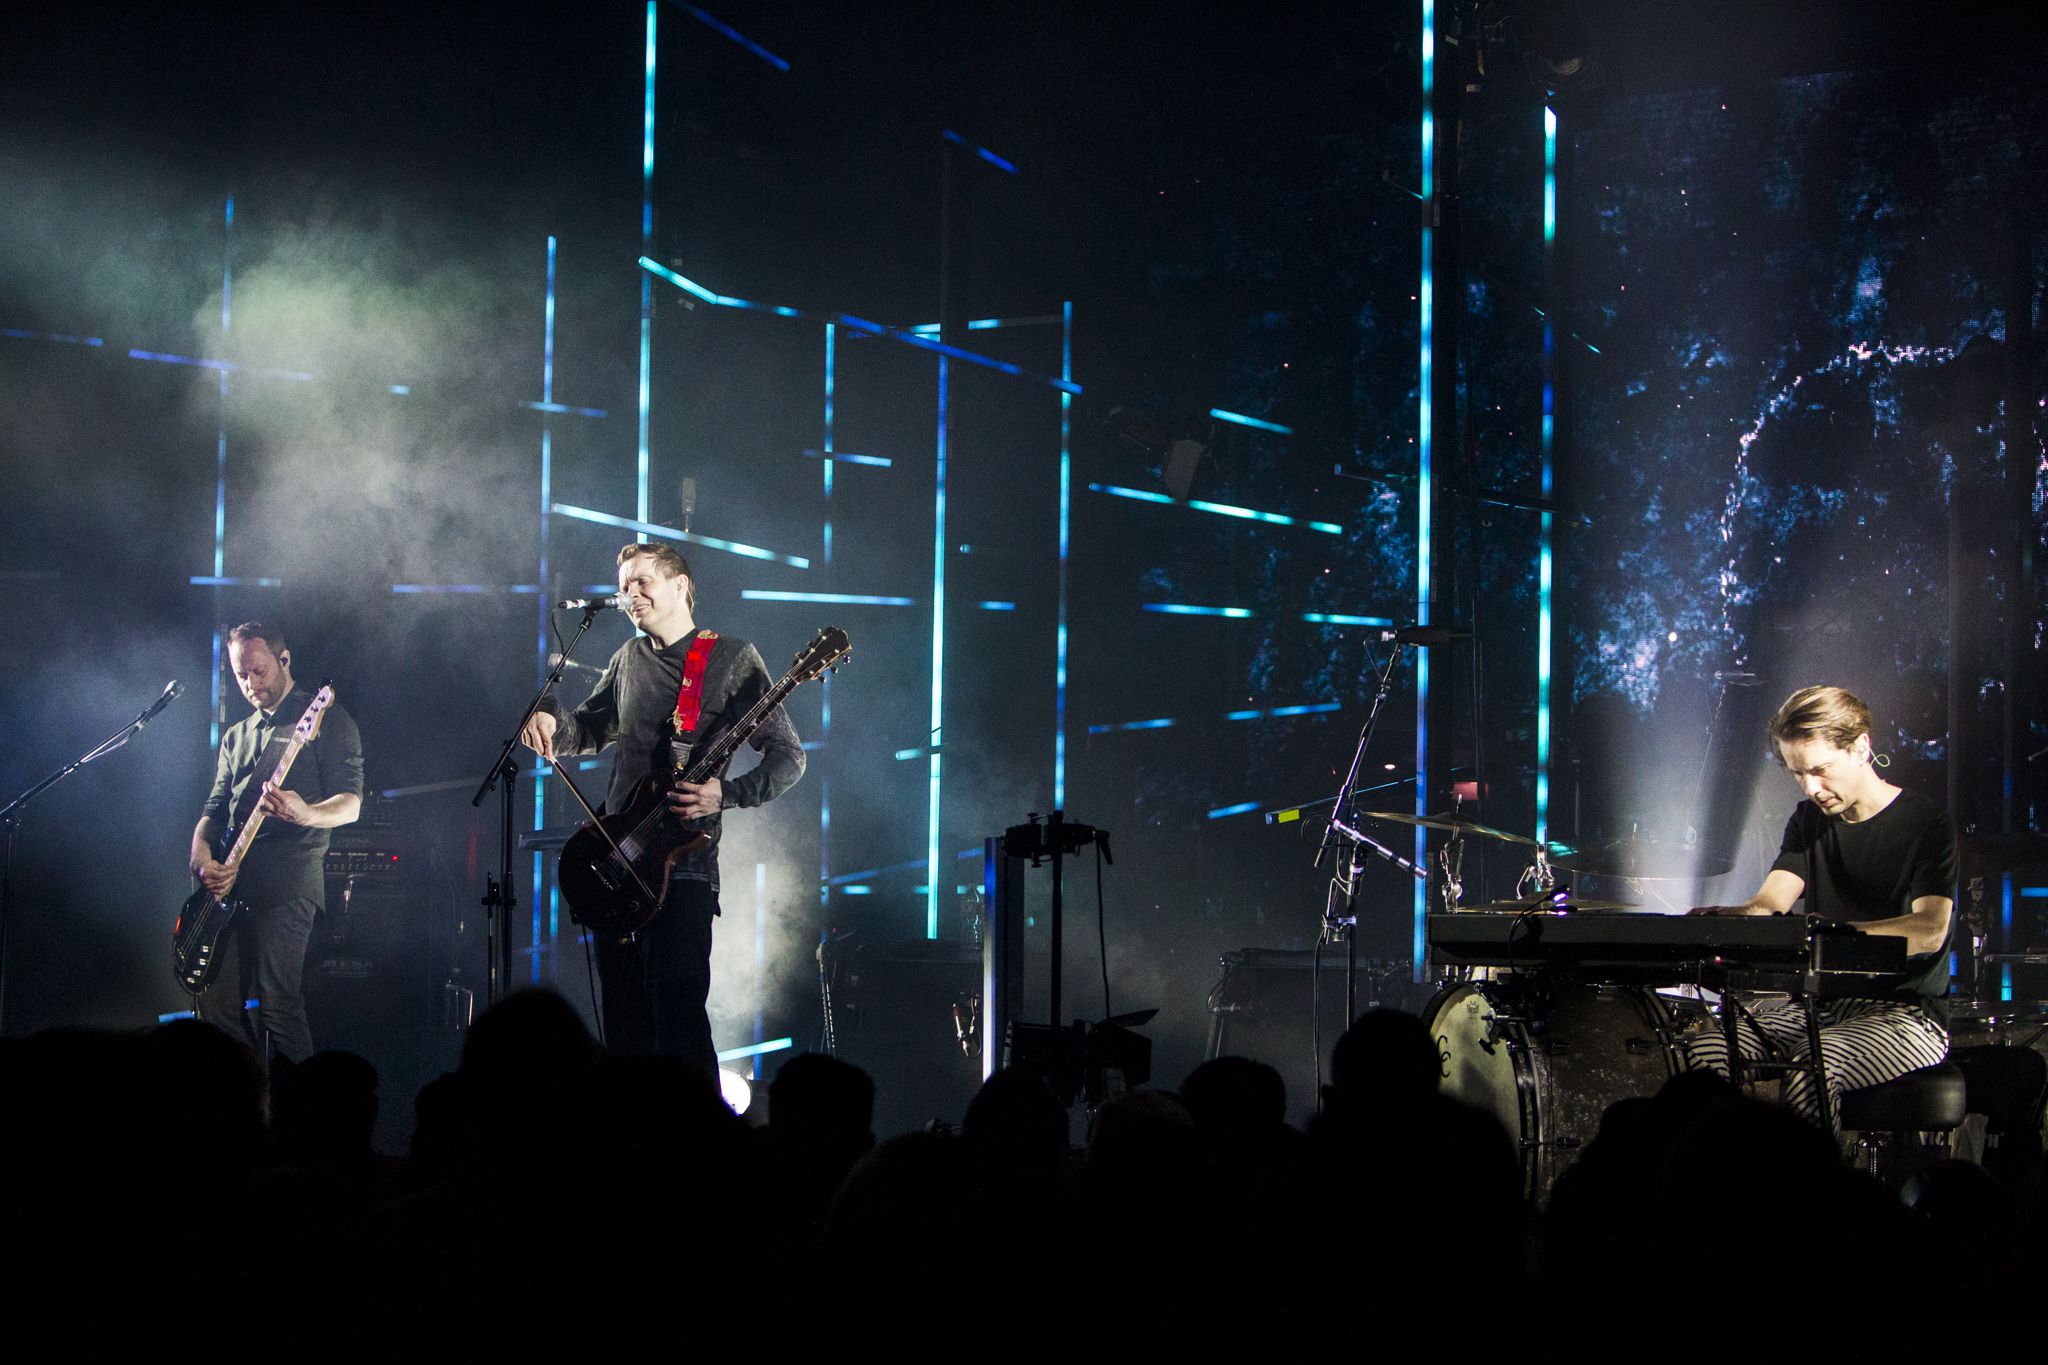 sigur ros 13 Live Review: Sigur Rós at the Fox Theater in Pomona (4/10)